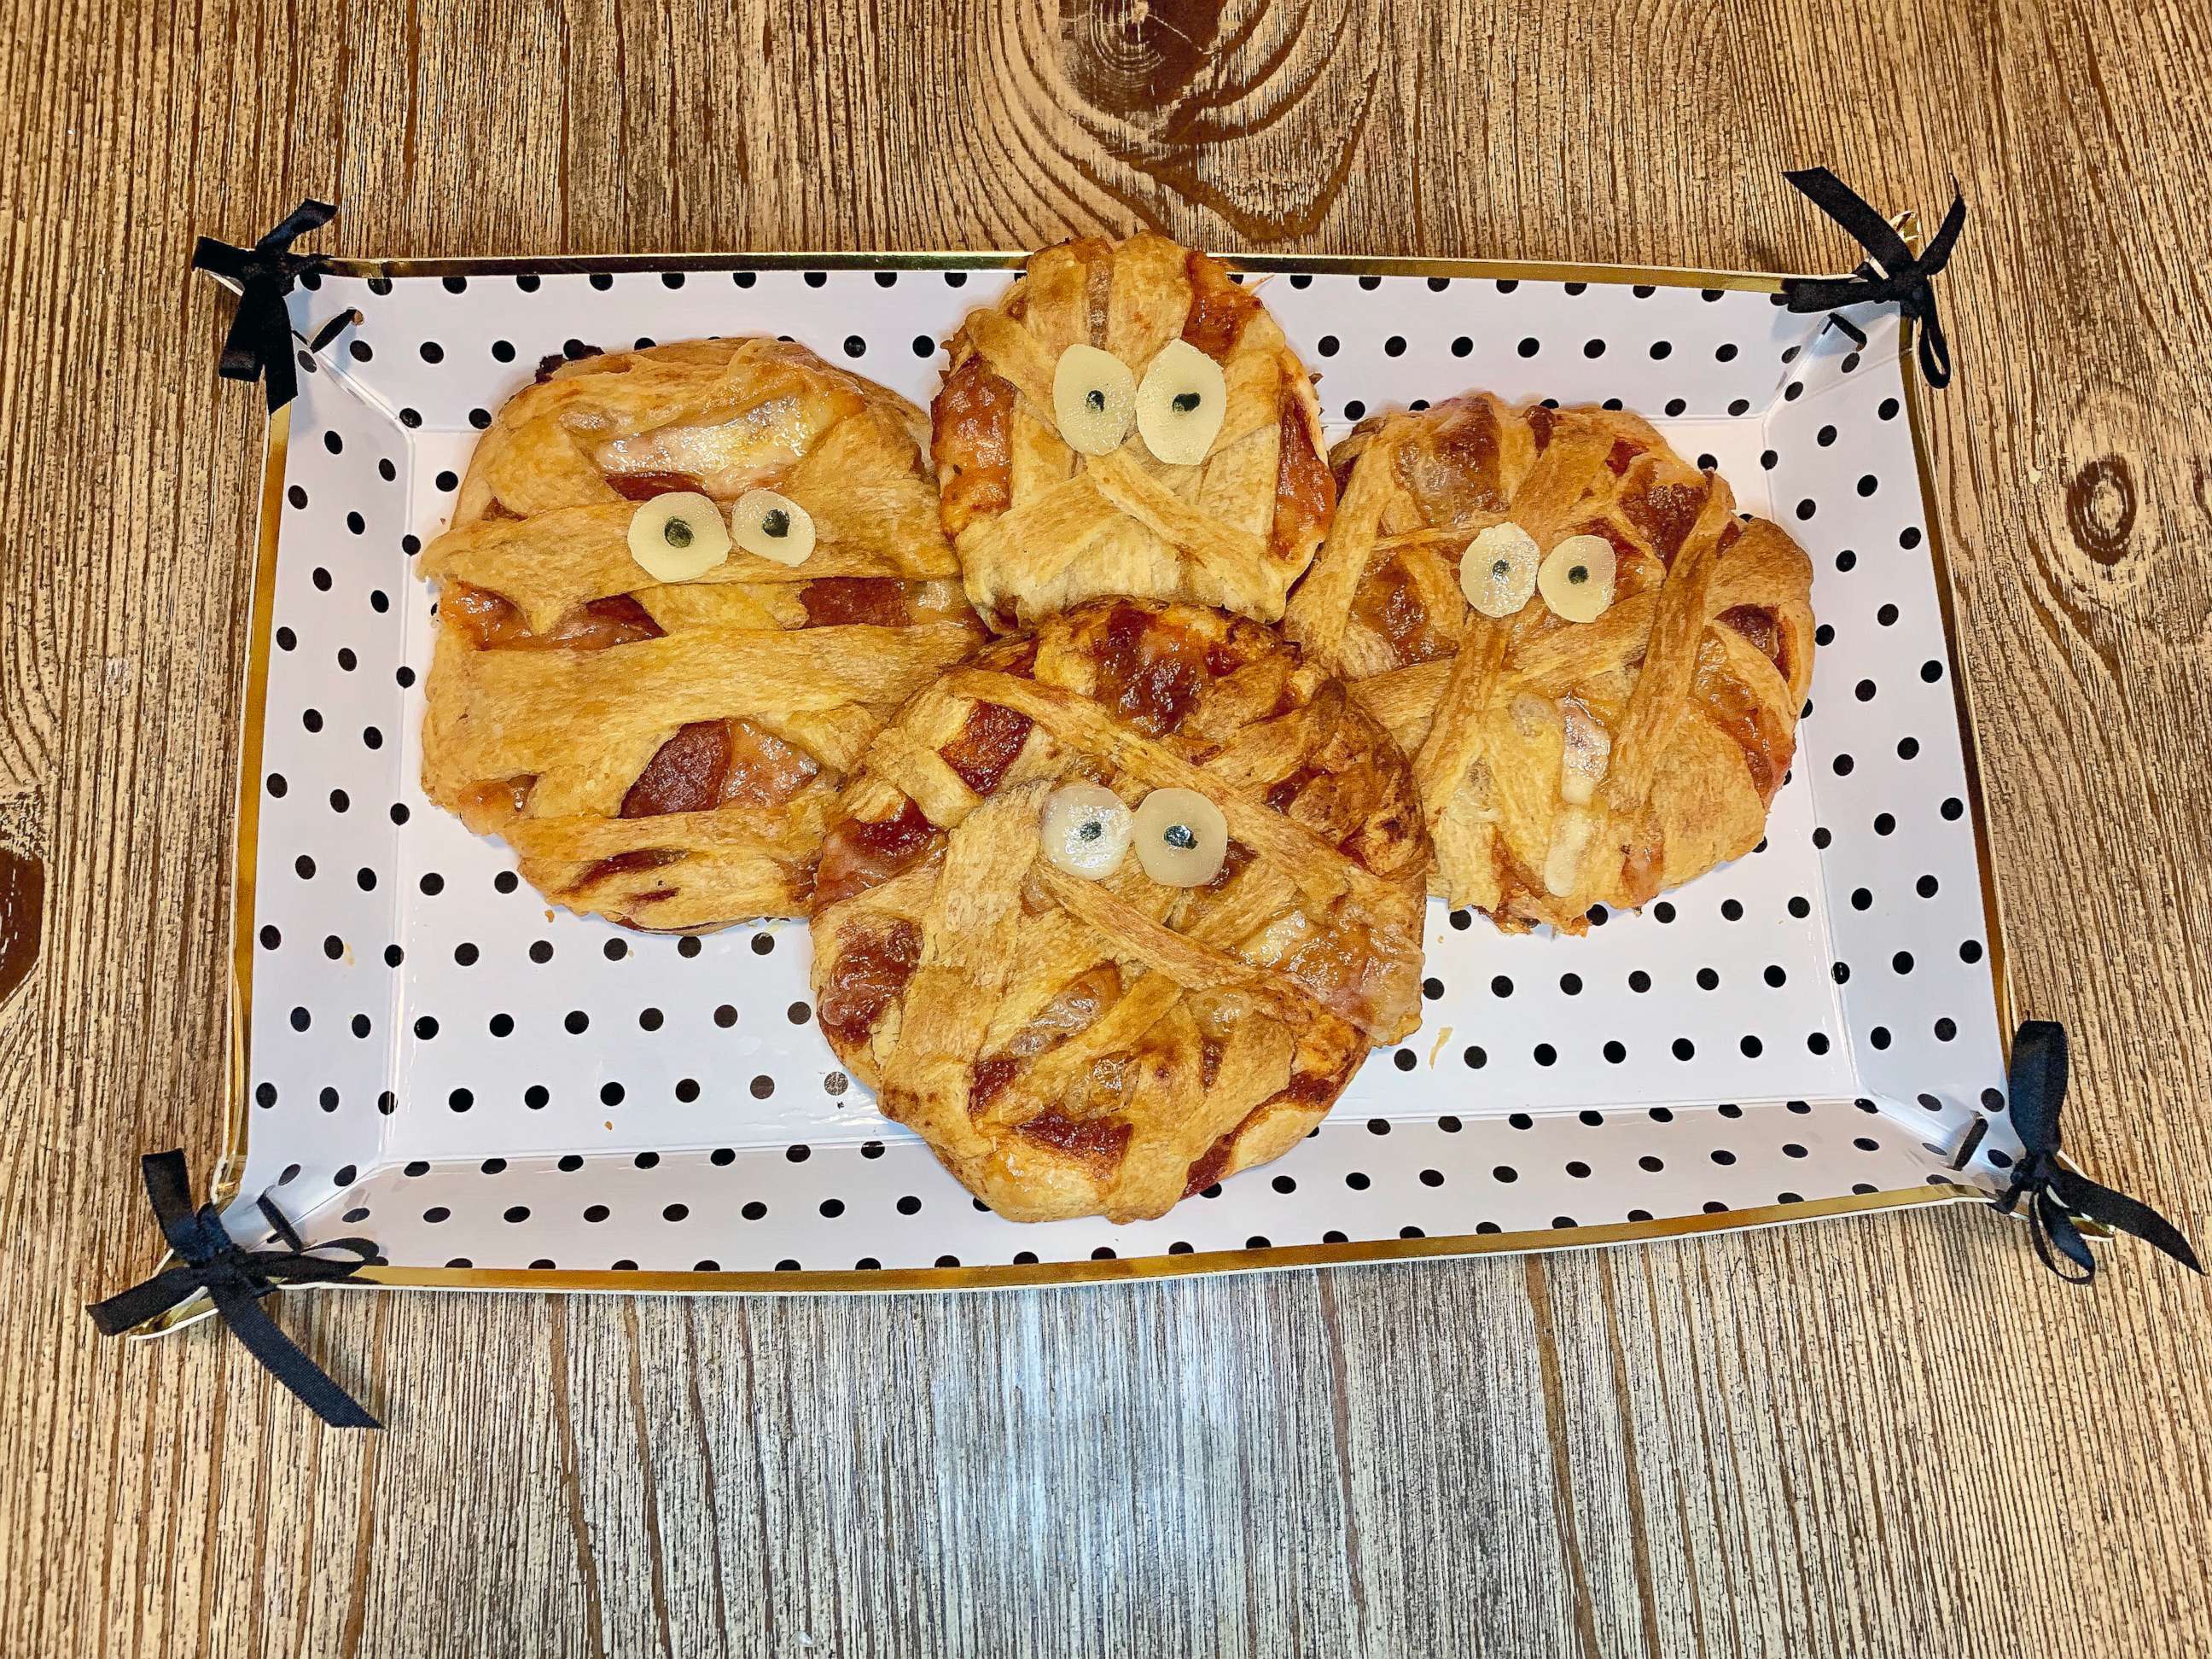 PHOTO: I made Pinterest's top 10 Halloween recipes of 2019, which included Mummy Pizza Pies.